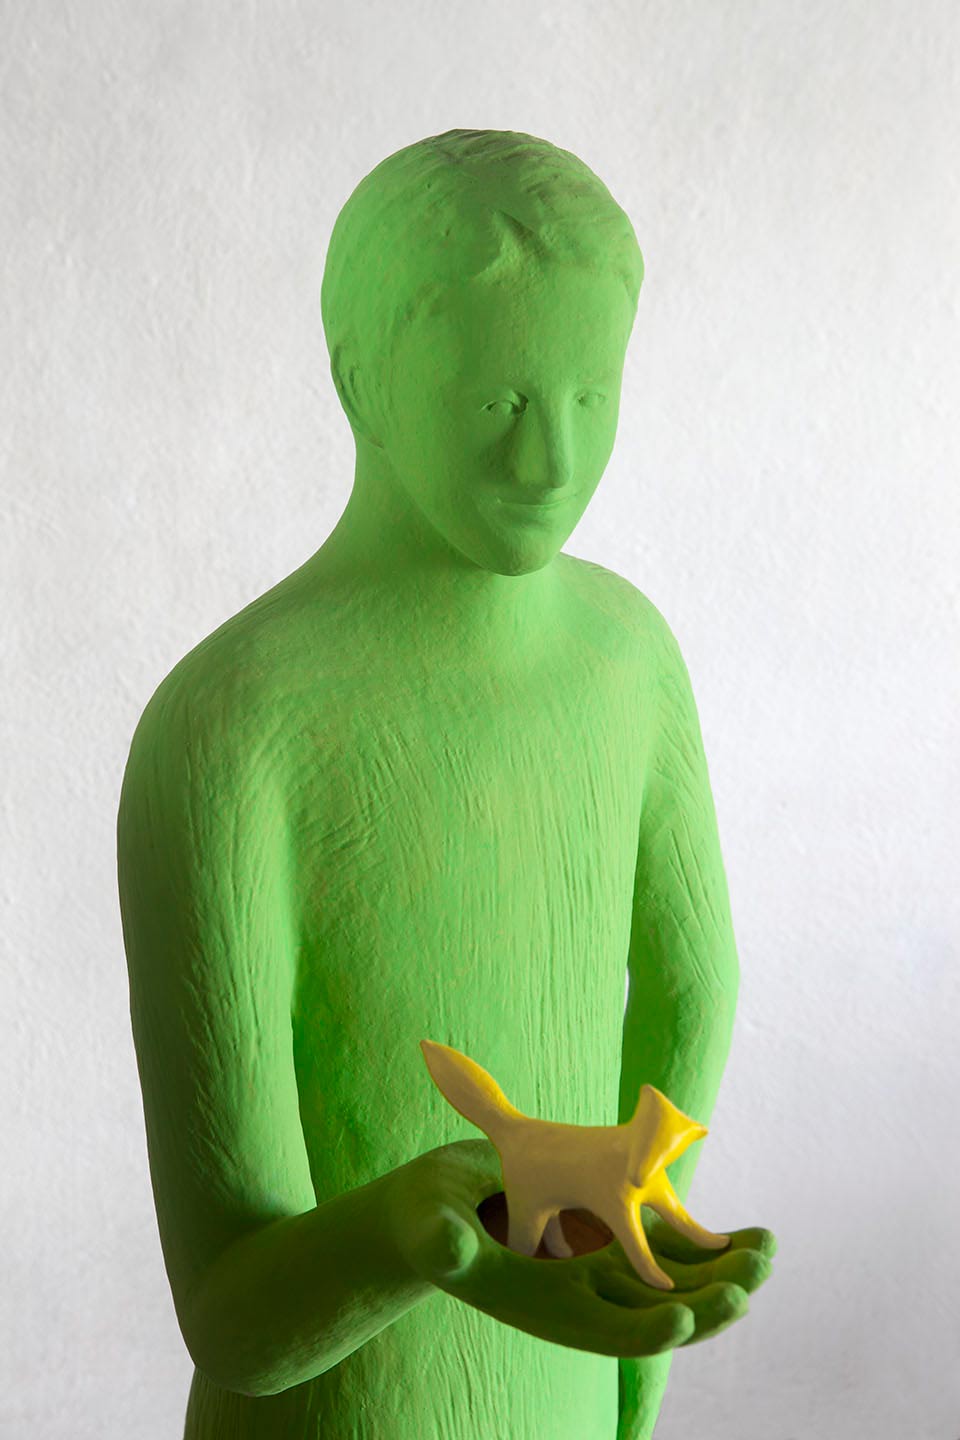 One day he becomes Adamo 2016, Sculpture by Kazumasa Mizokami, 2016 One day he becomes Adamo. a green boy, an animal similar to an orange squirrel emerges from his right hand